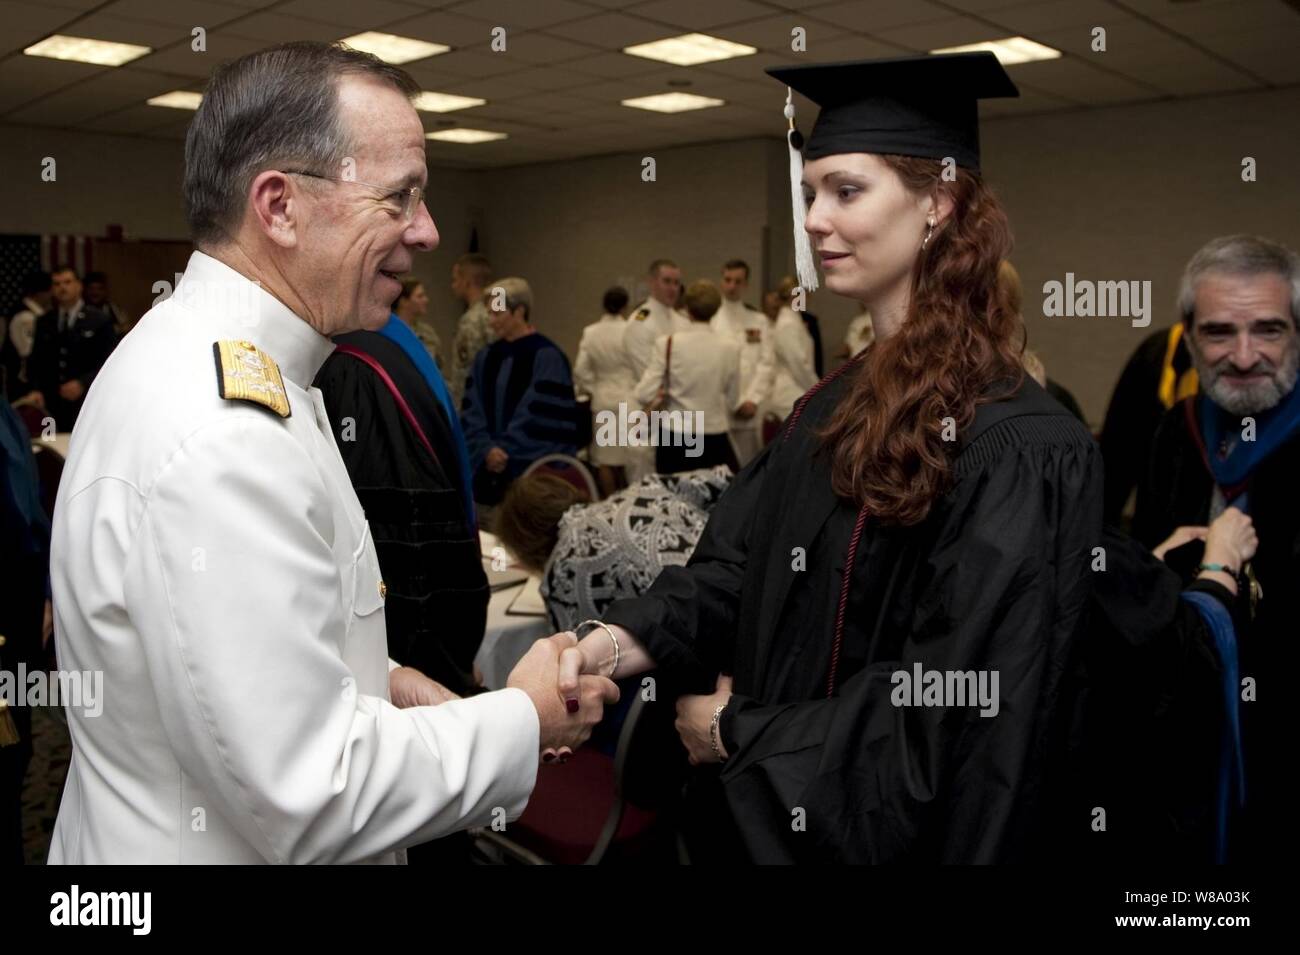 Chairman of the Joint Chiefs of Staff Adm. Mike Mullen, U.S. Navy, greets U.S. Army Staff Sgt. Shasha Maria-Martin prior to Florida State University 2011 Spring Commencement ceremonies in Tallahassee, Fla., on April 30, 2011.  Martin, a twice-deployed Iraq veteran, graduated with a degree in International Relations. Stock Photo